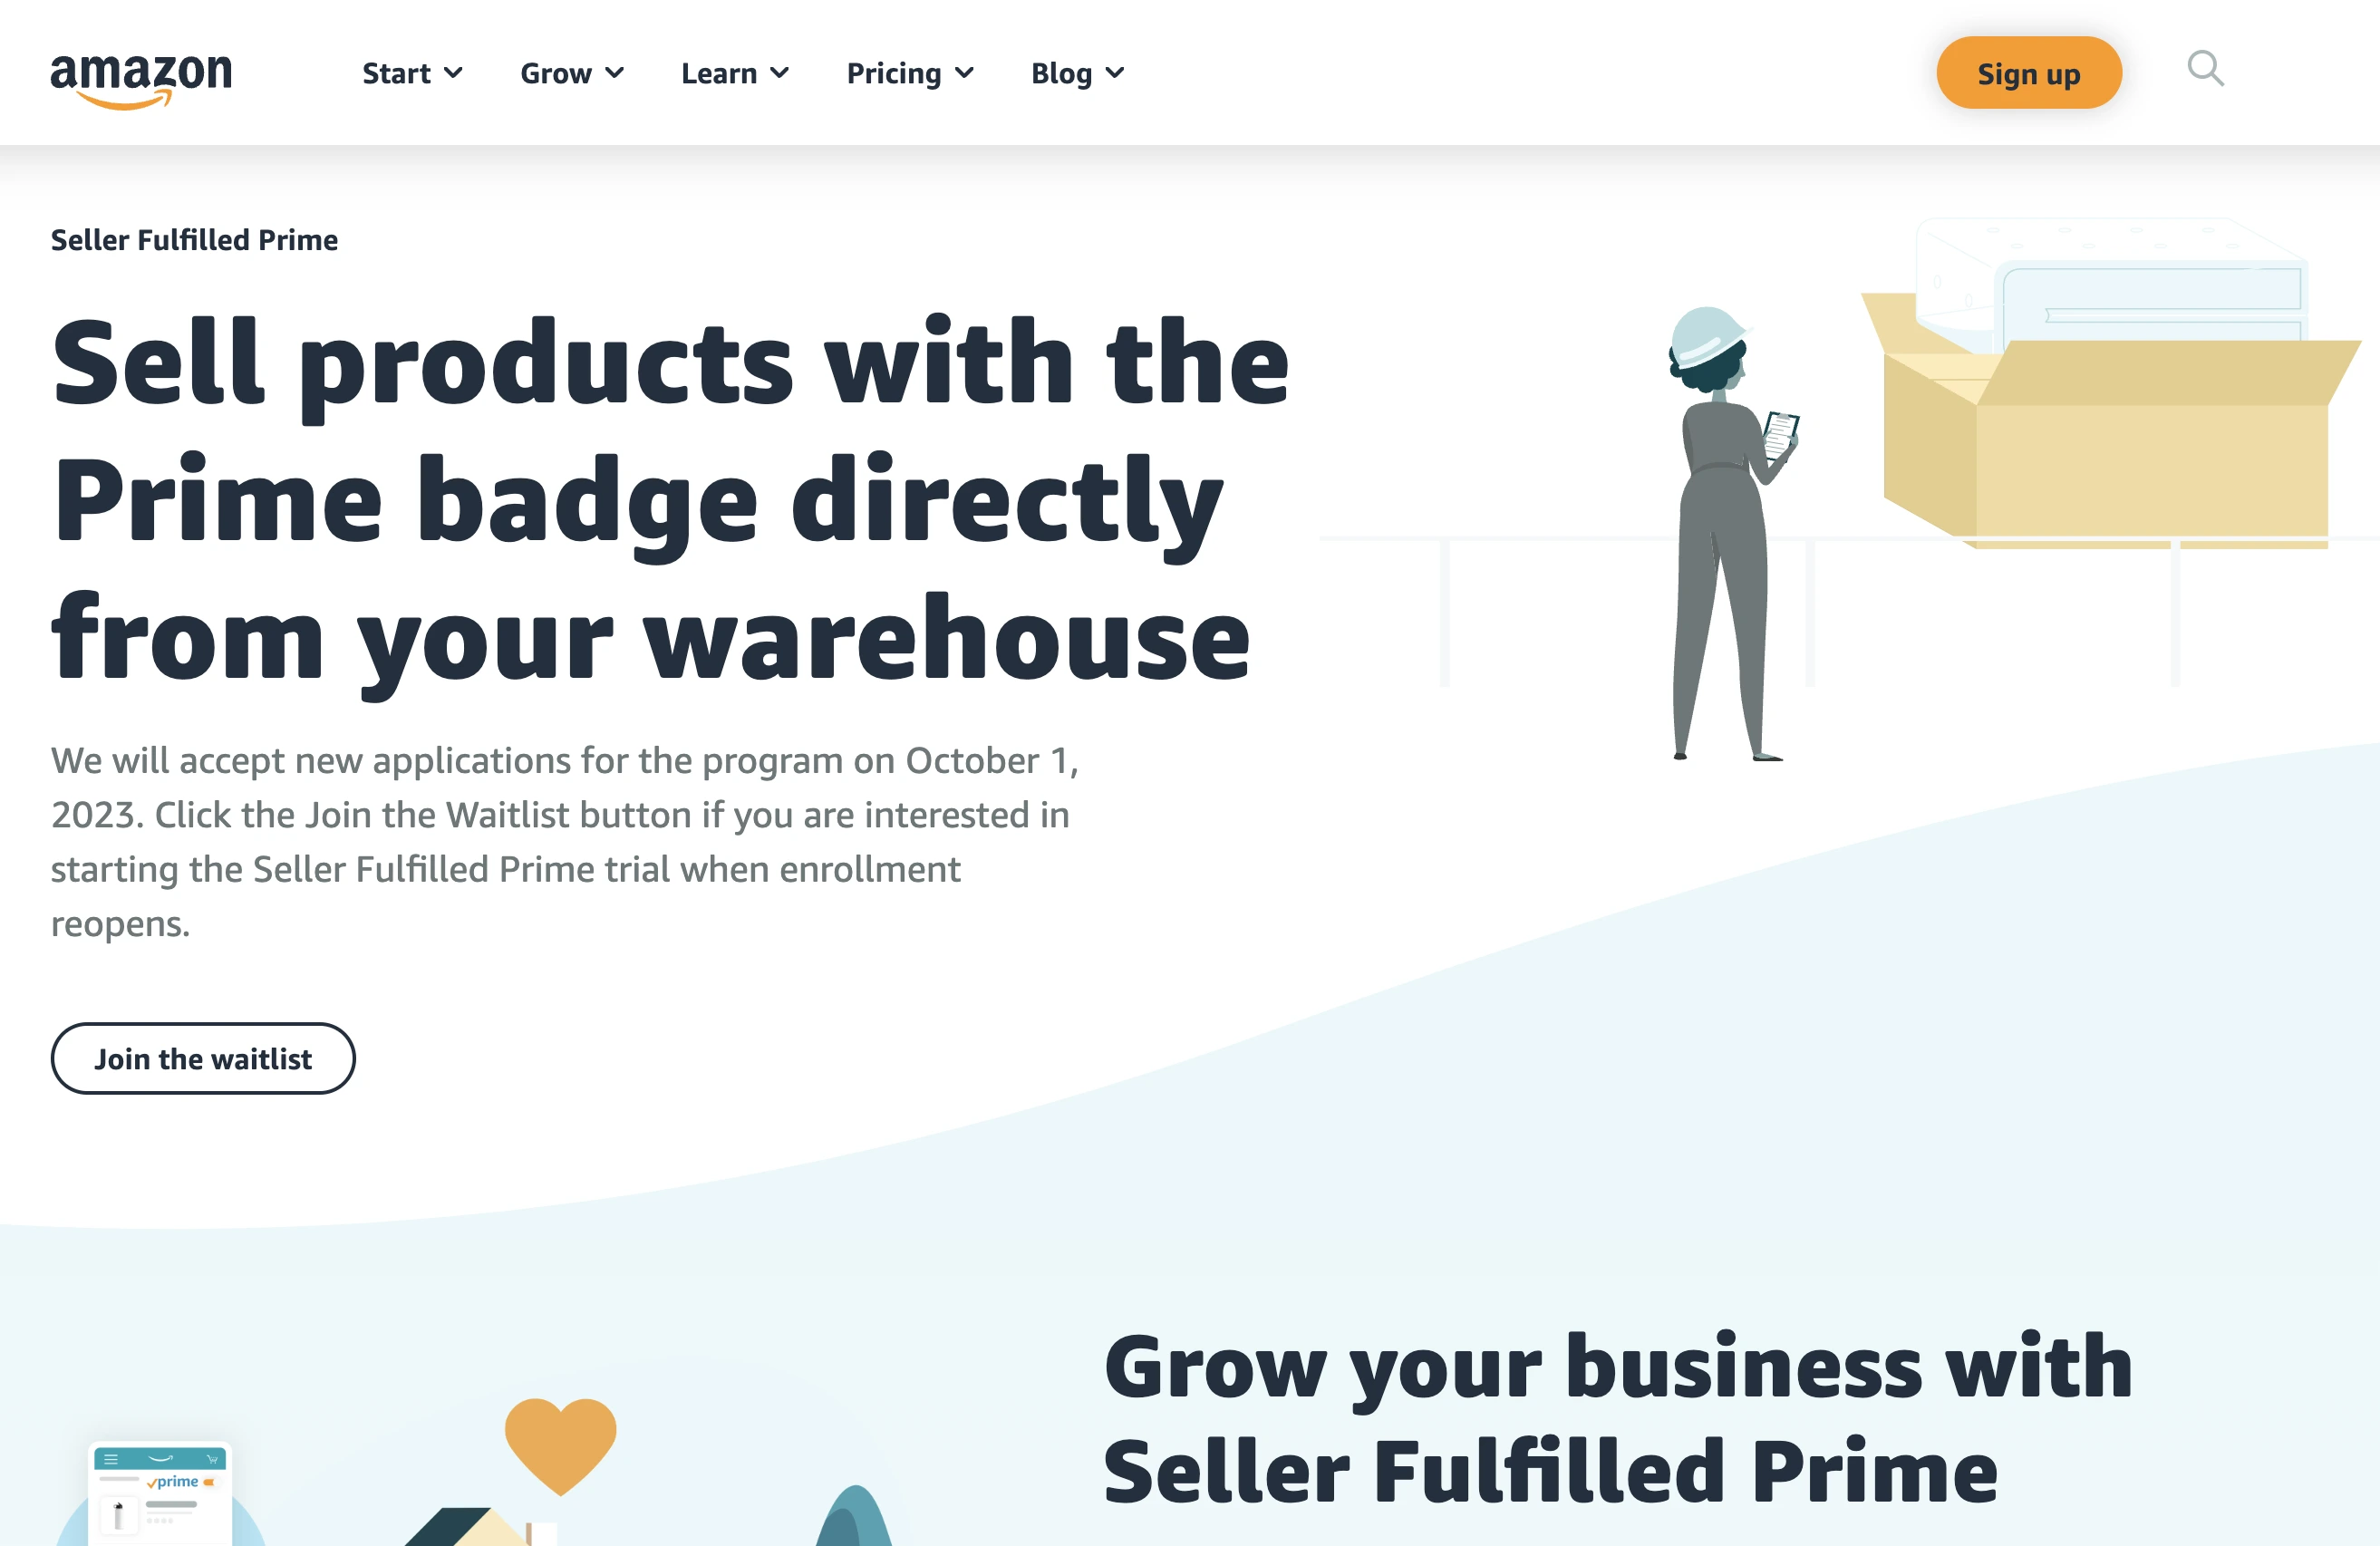 Sell products with the Prime badge directly from your warehouse